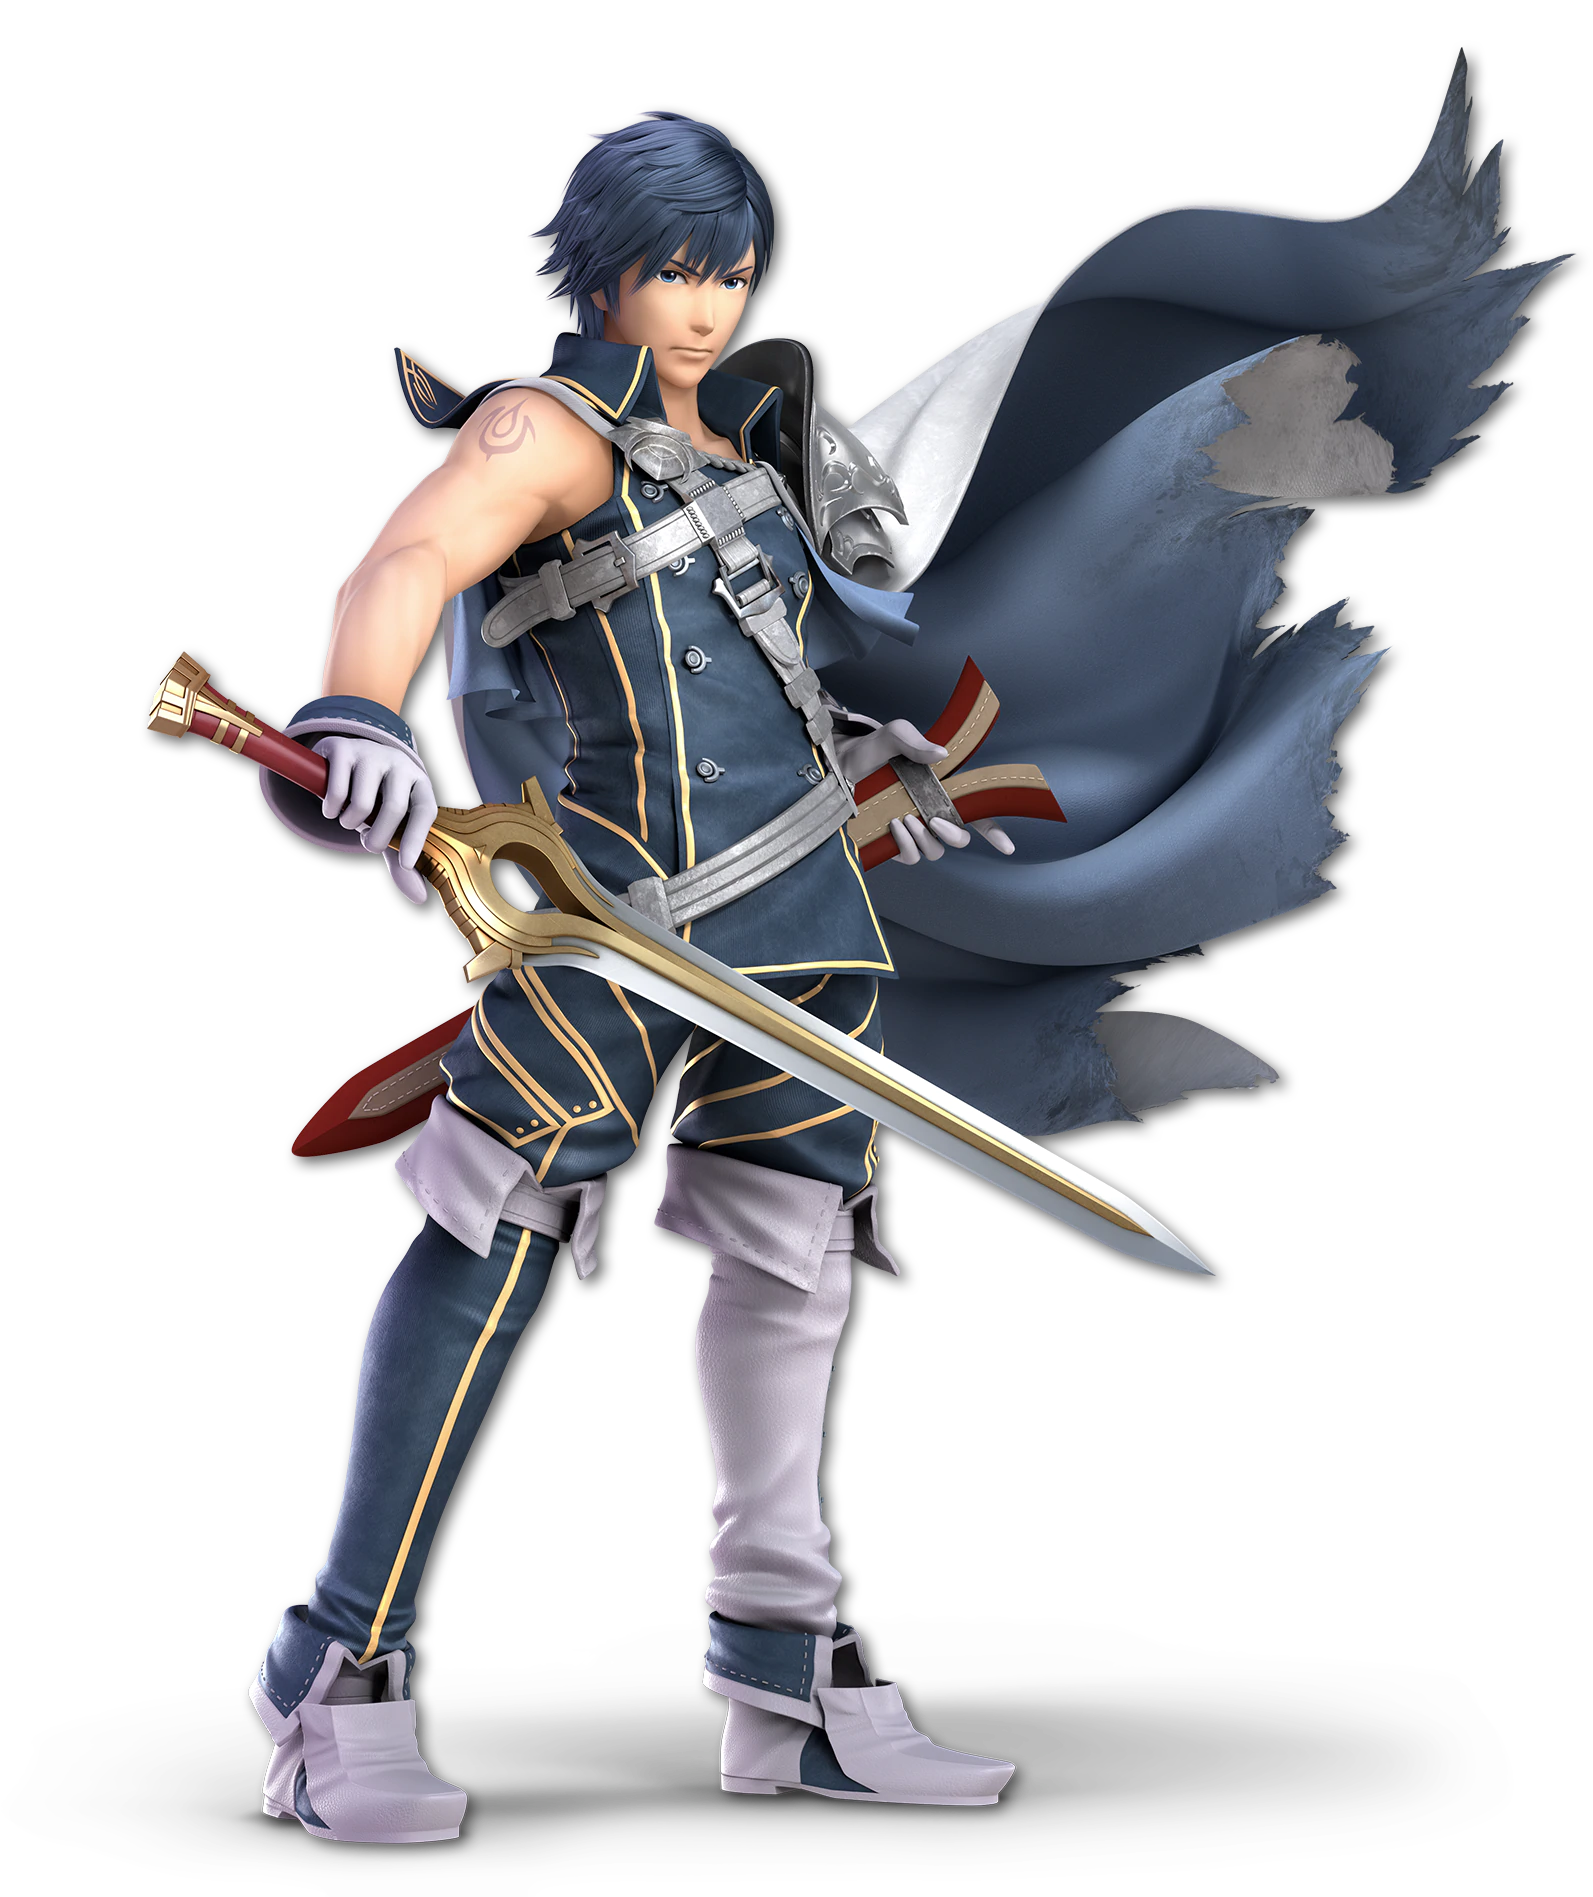 https://static.wikia.nocookie.net/ssb/images/a/a9/Chrom_-_Super_Smash_Bros._Ultimate.png/revision/latest?cb=20180808153028